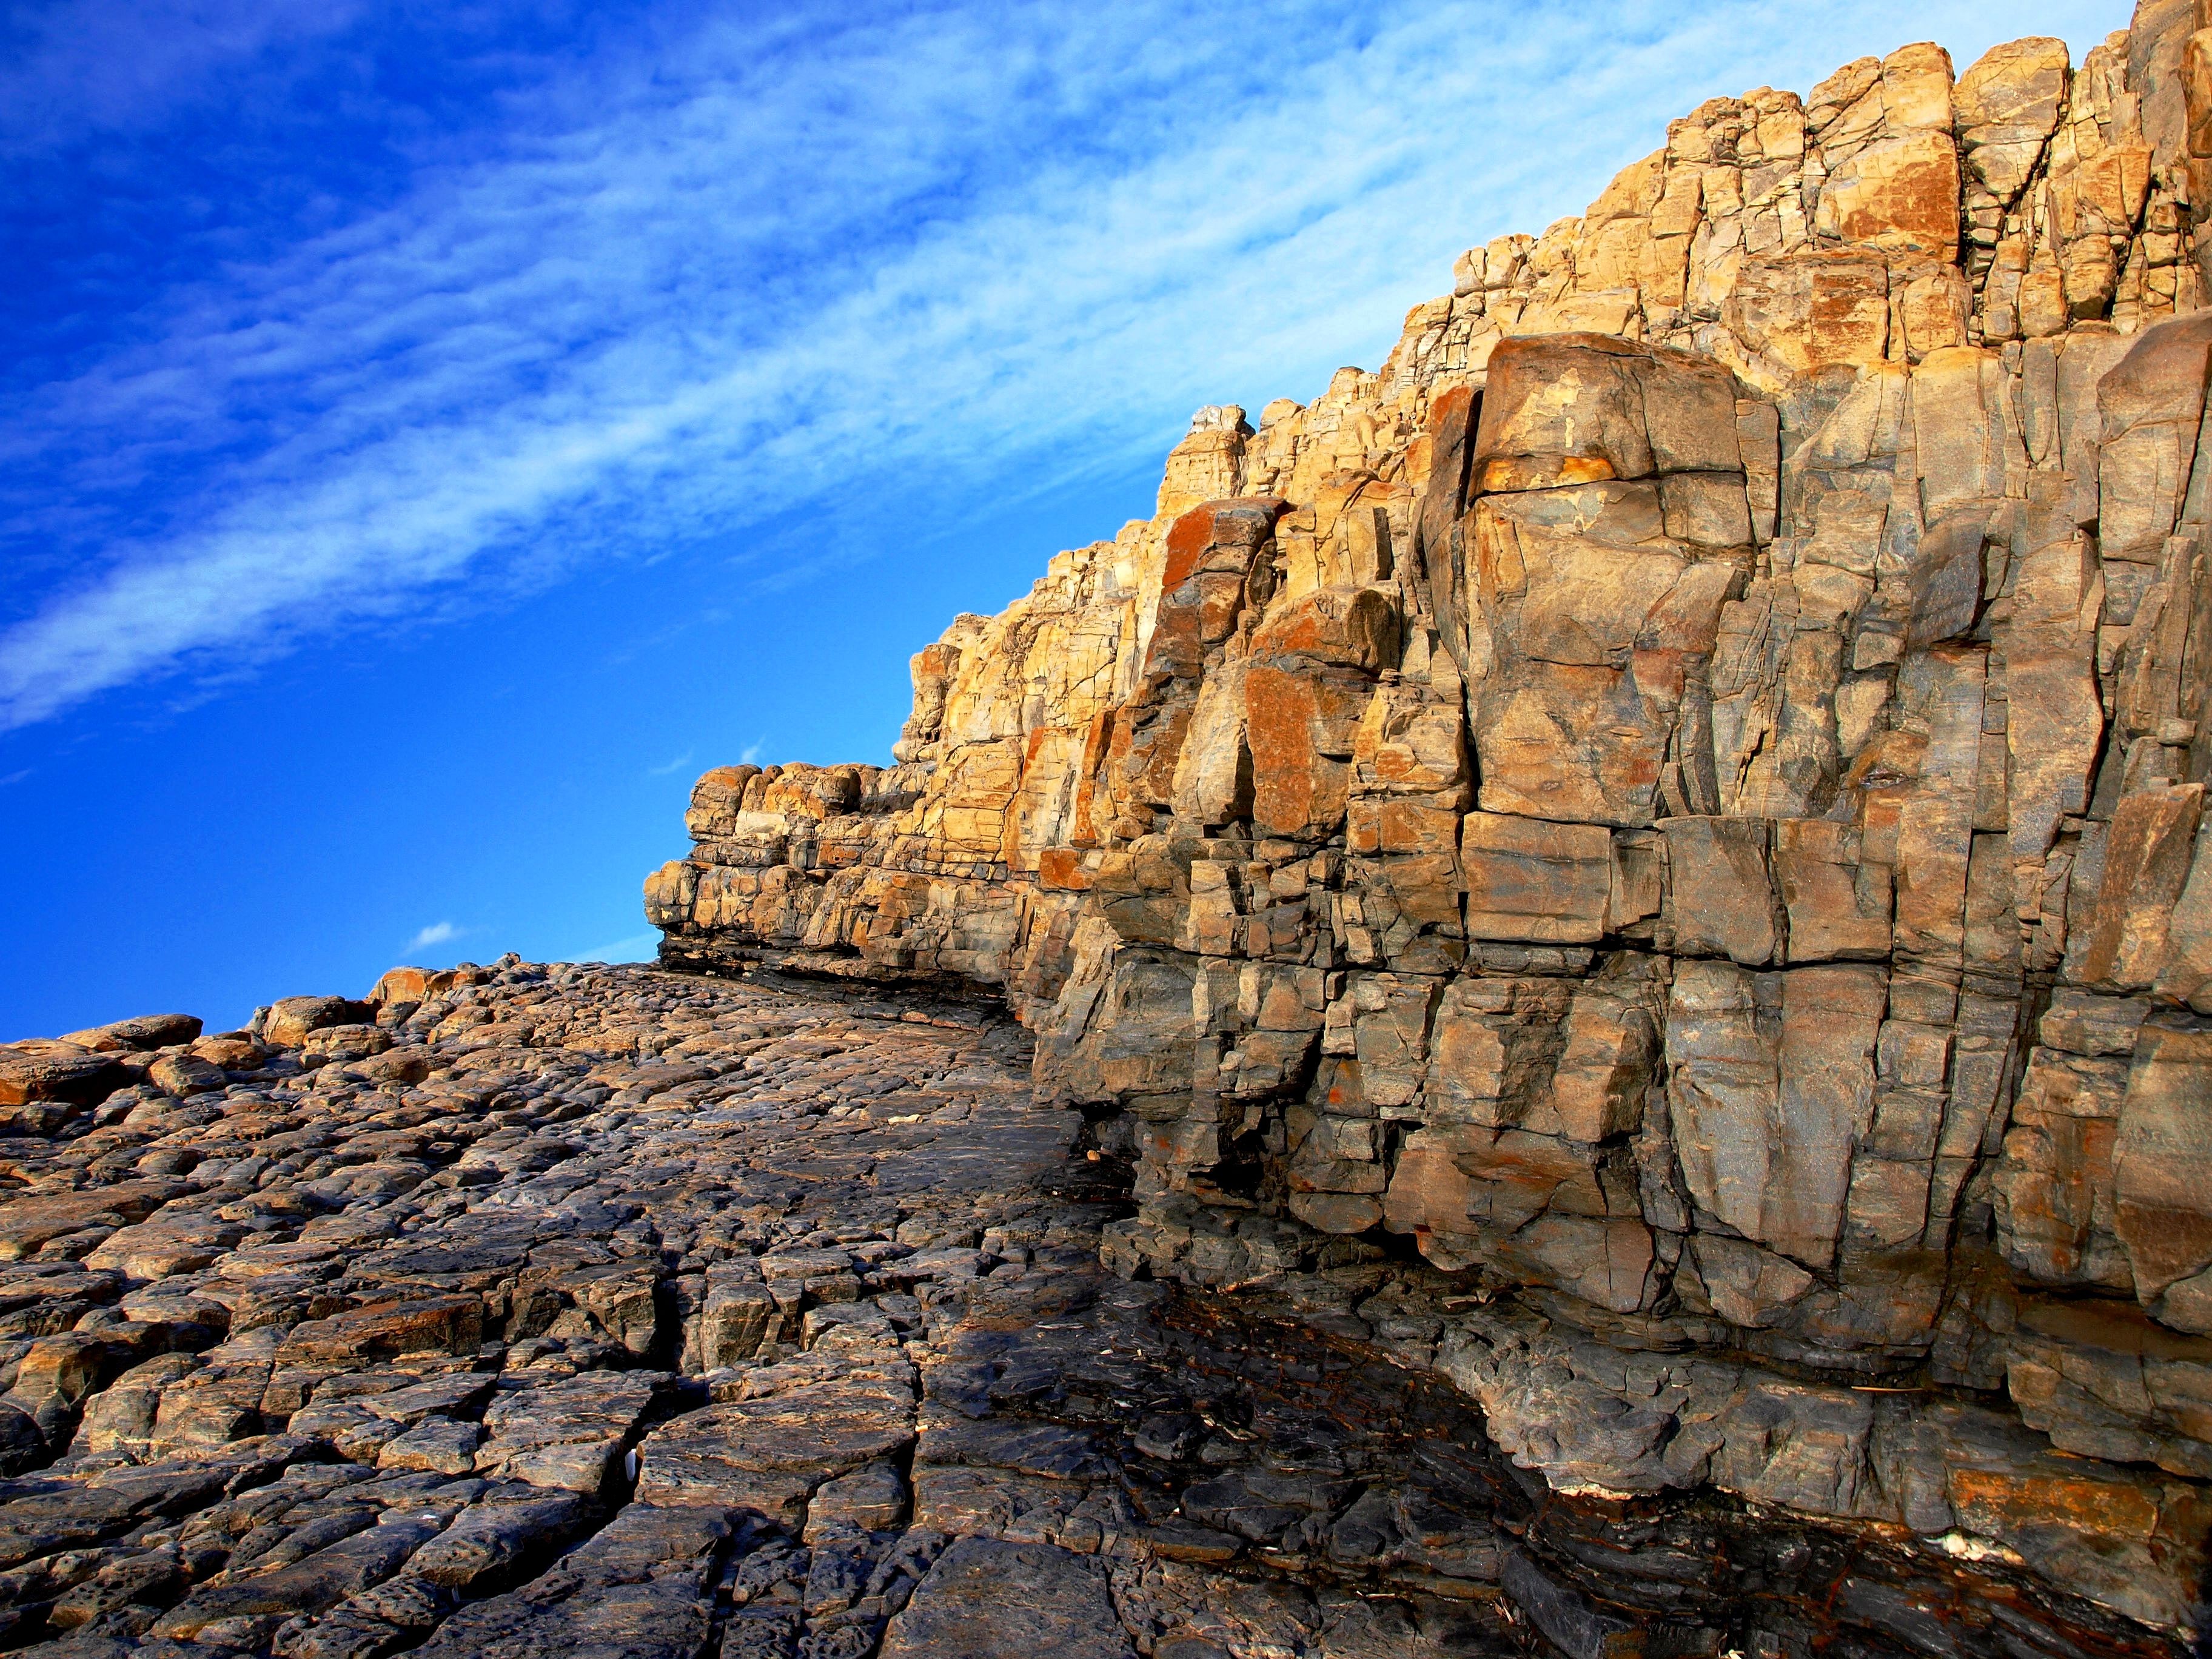 Golden rock picture, by Perathor for: rocks rock photography contest ...